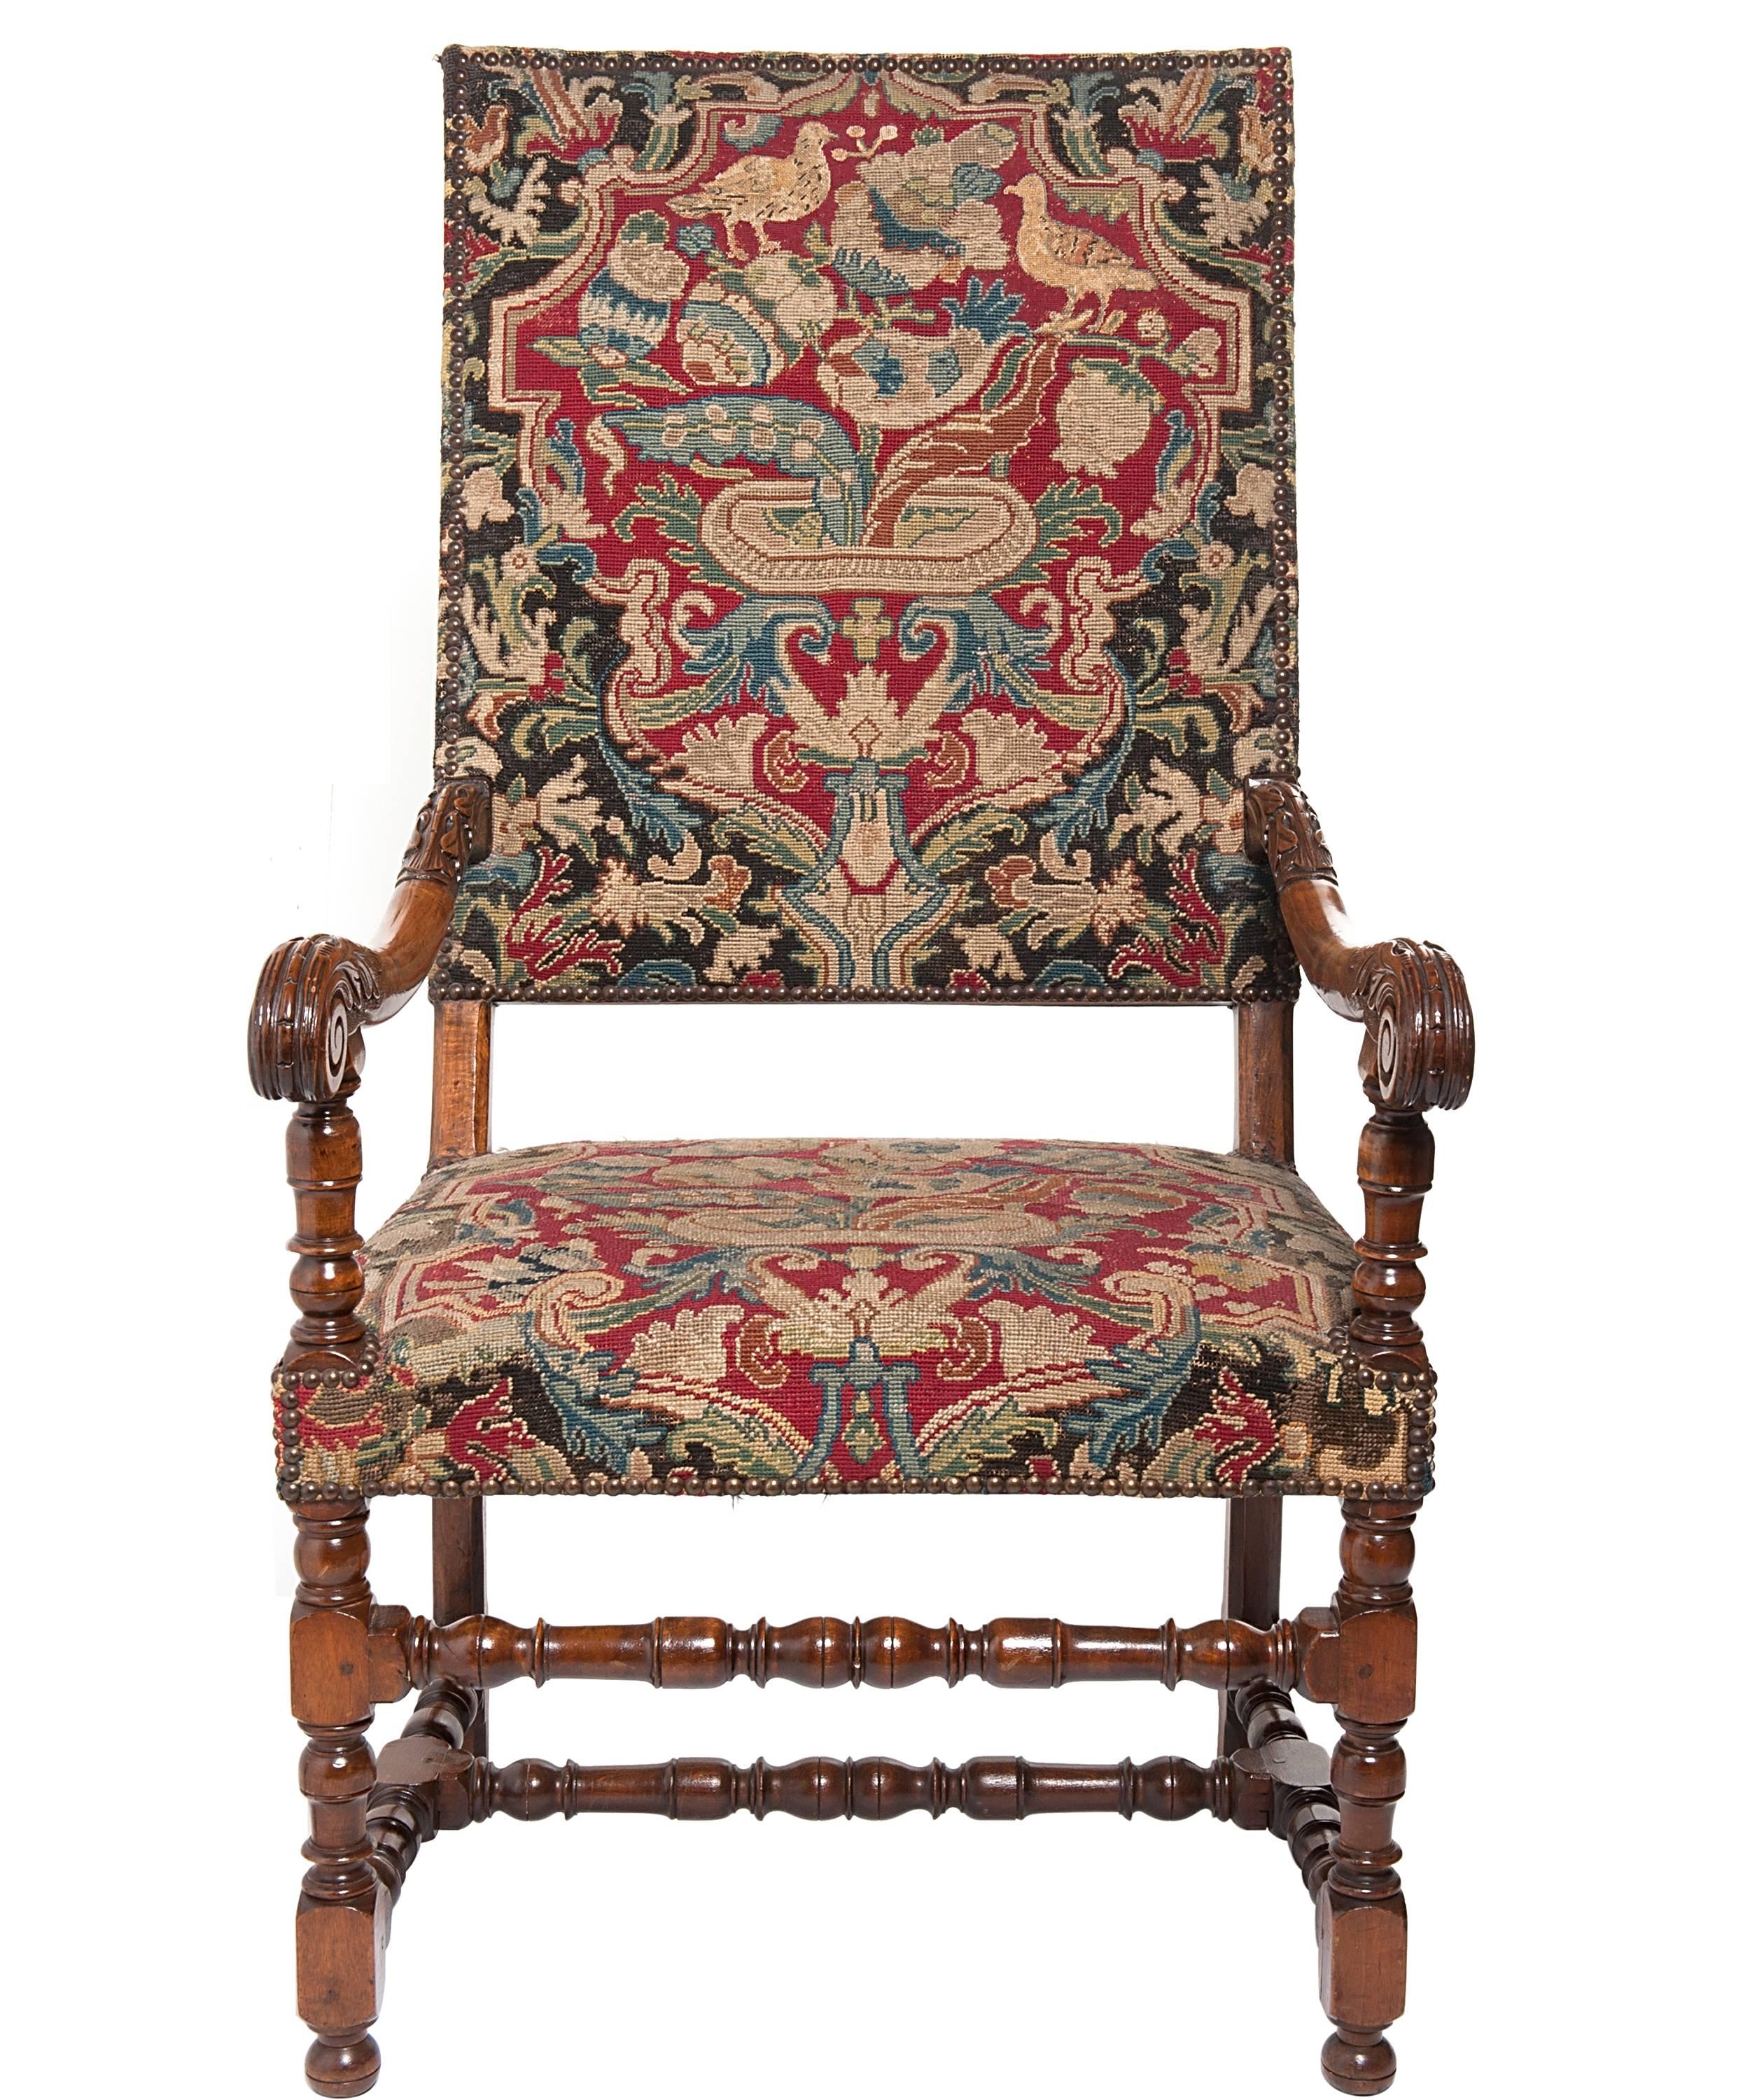 A superb of large walnut armchairs with slightly slanted rectangular backrests and cushioned seat. Scrolled and partly foliate carved arms finishing in 'bec de corbin'. On block and spooled turned legs linked by a stretcher. Both chairs upholstered